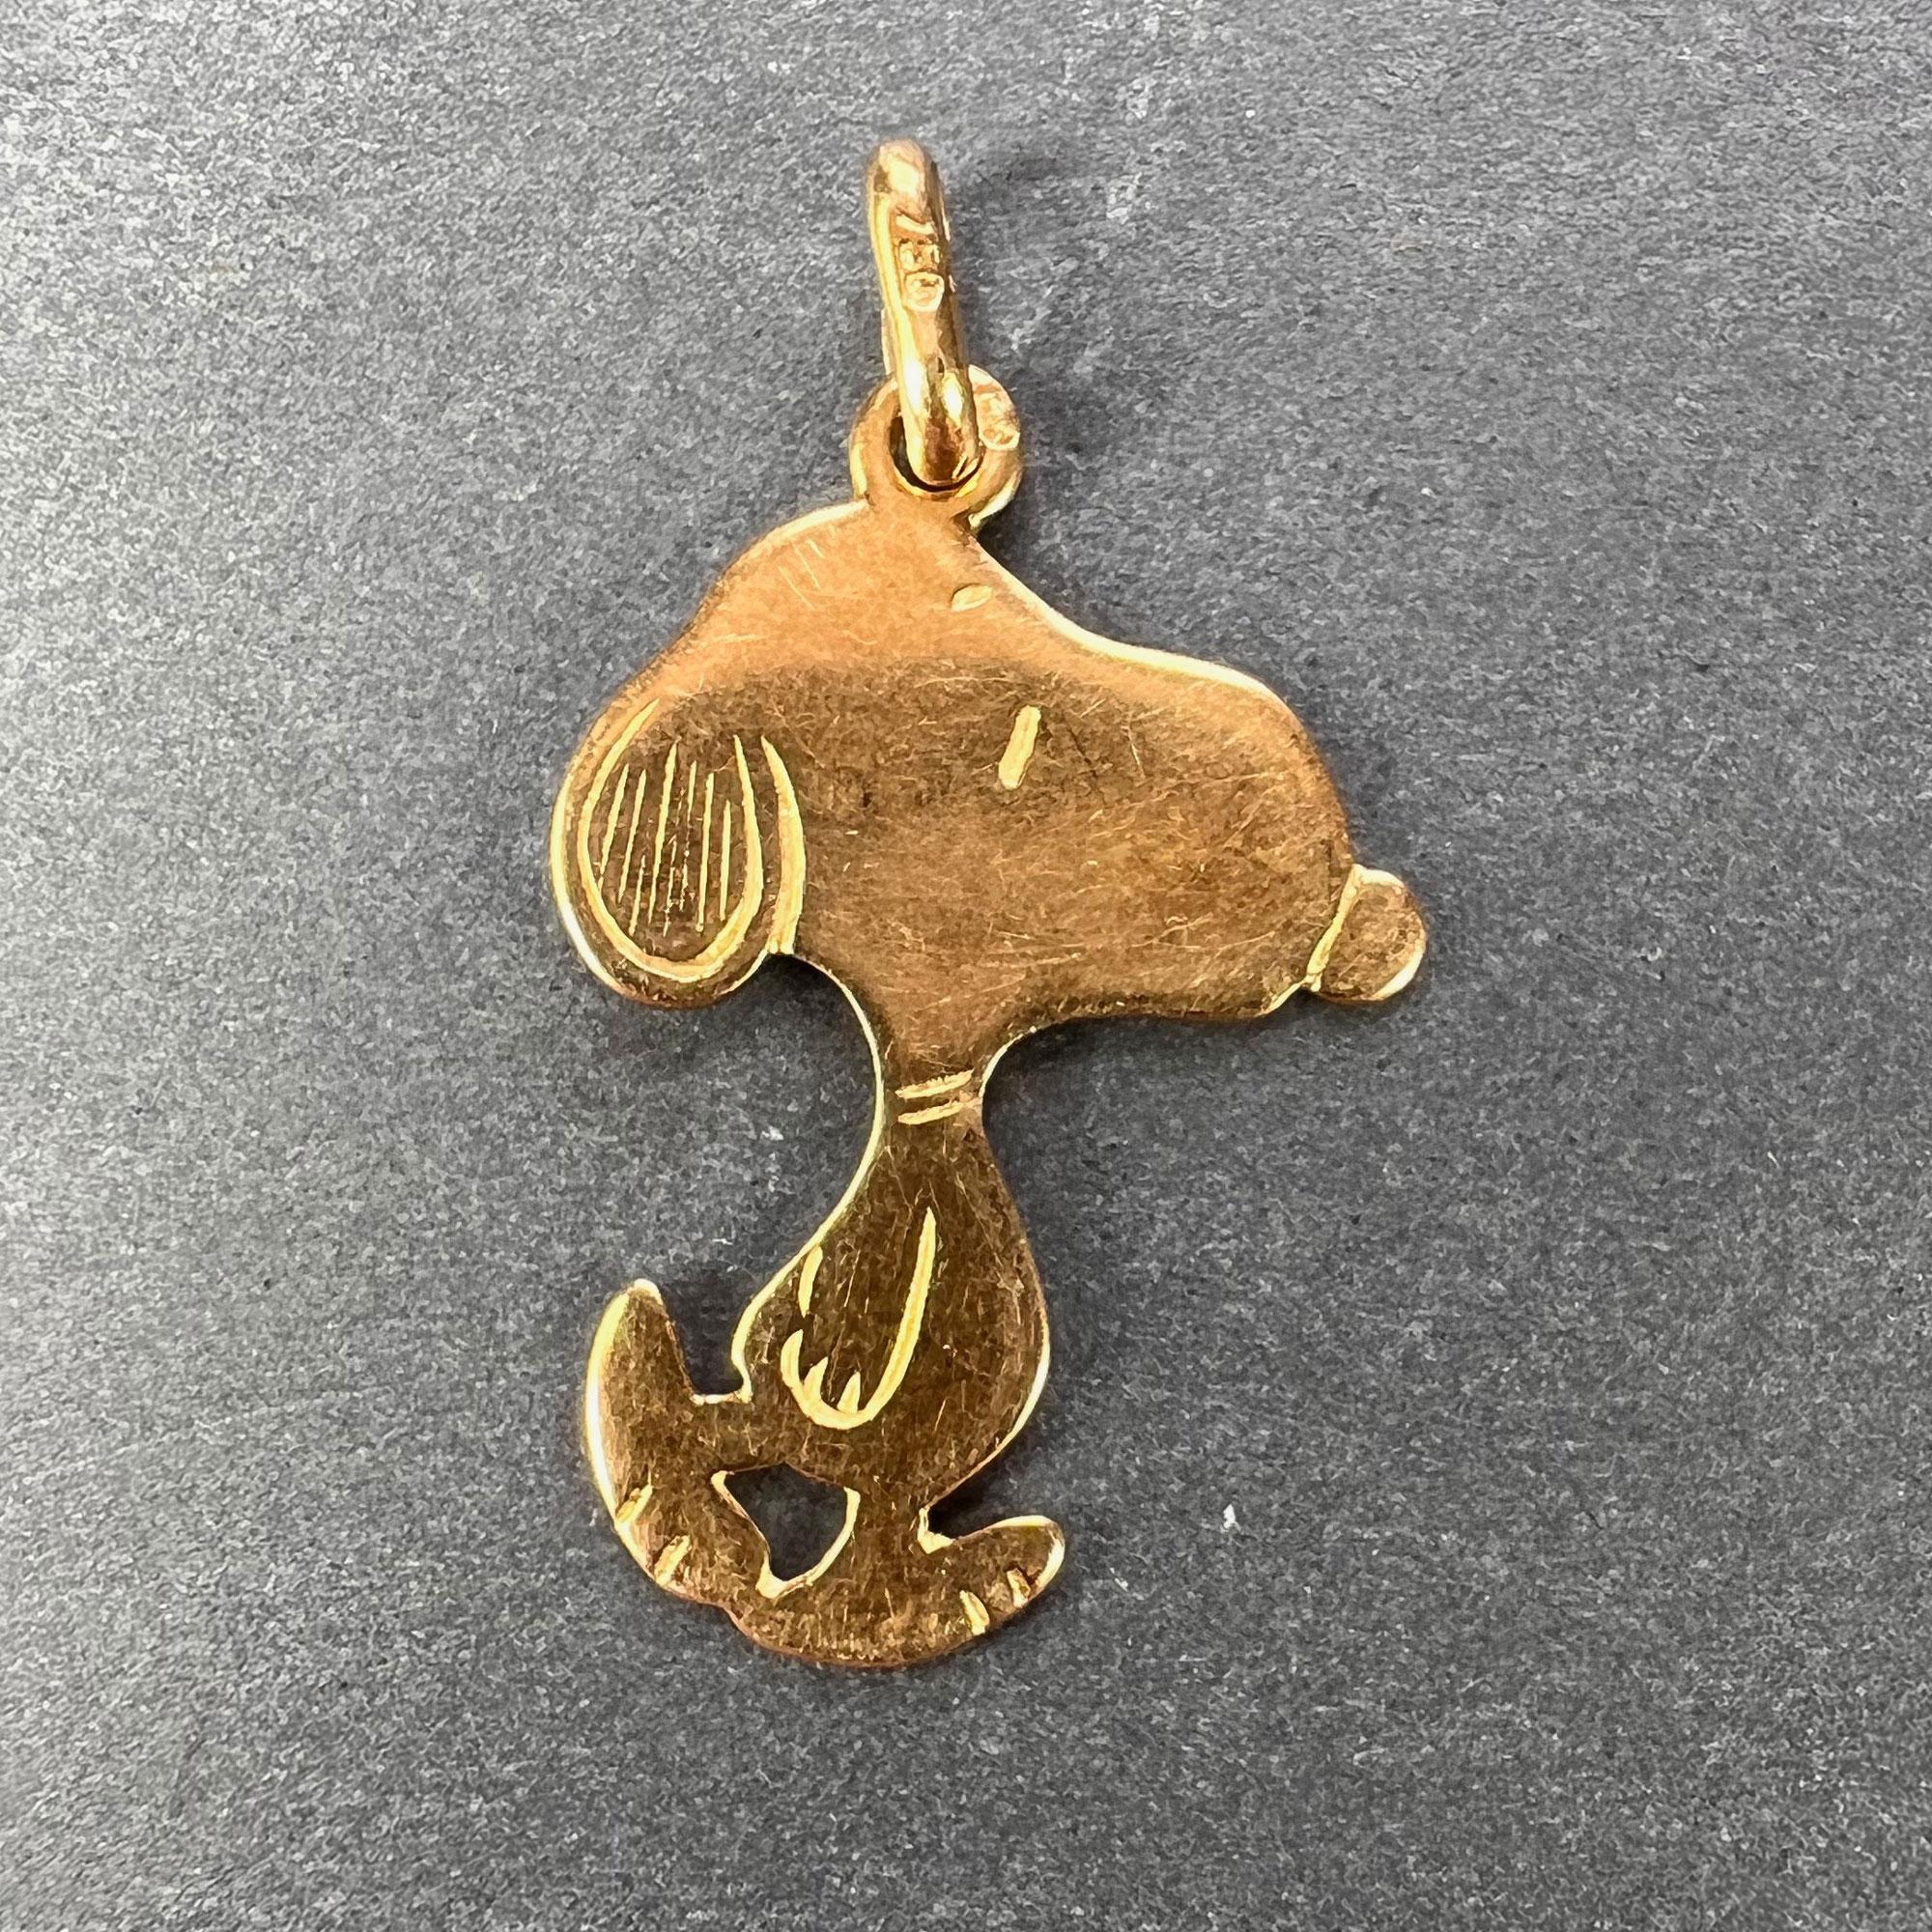 An 18 karat (18K) yellow gold charm pendant designed as the dog Snoopy from the cartoon strip ‘Peanuts’. Stamped with the owl mark for 18 karat gold and French import, and 750 for 18 karat gold to the bail. Also numbered 303 and engraved MOM.
